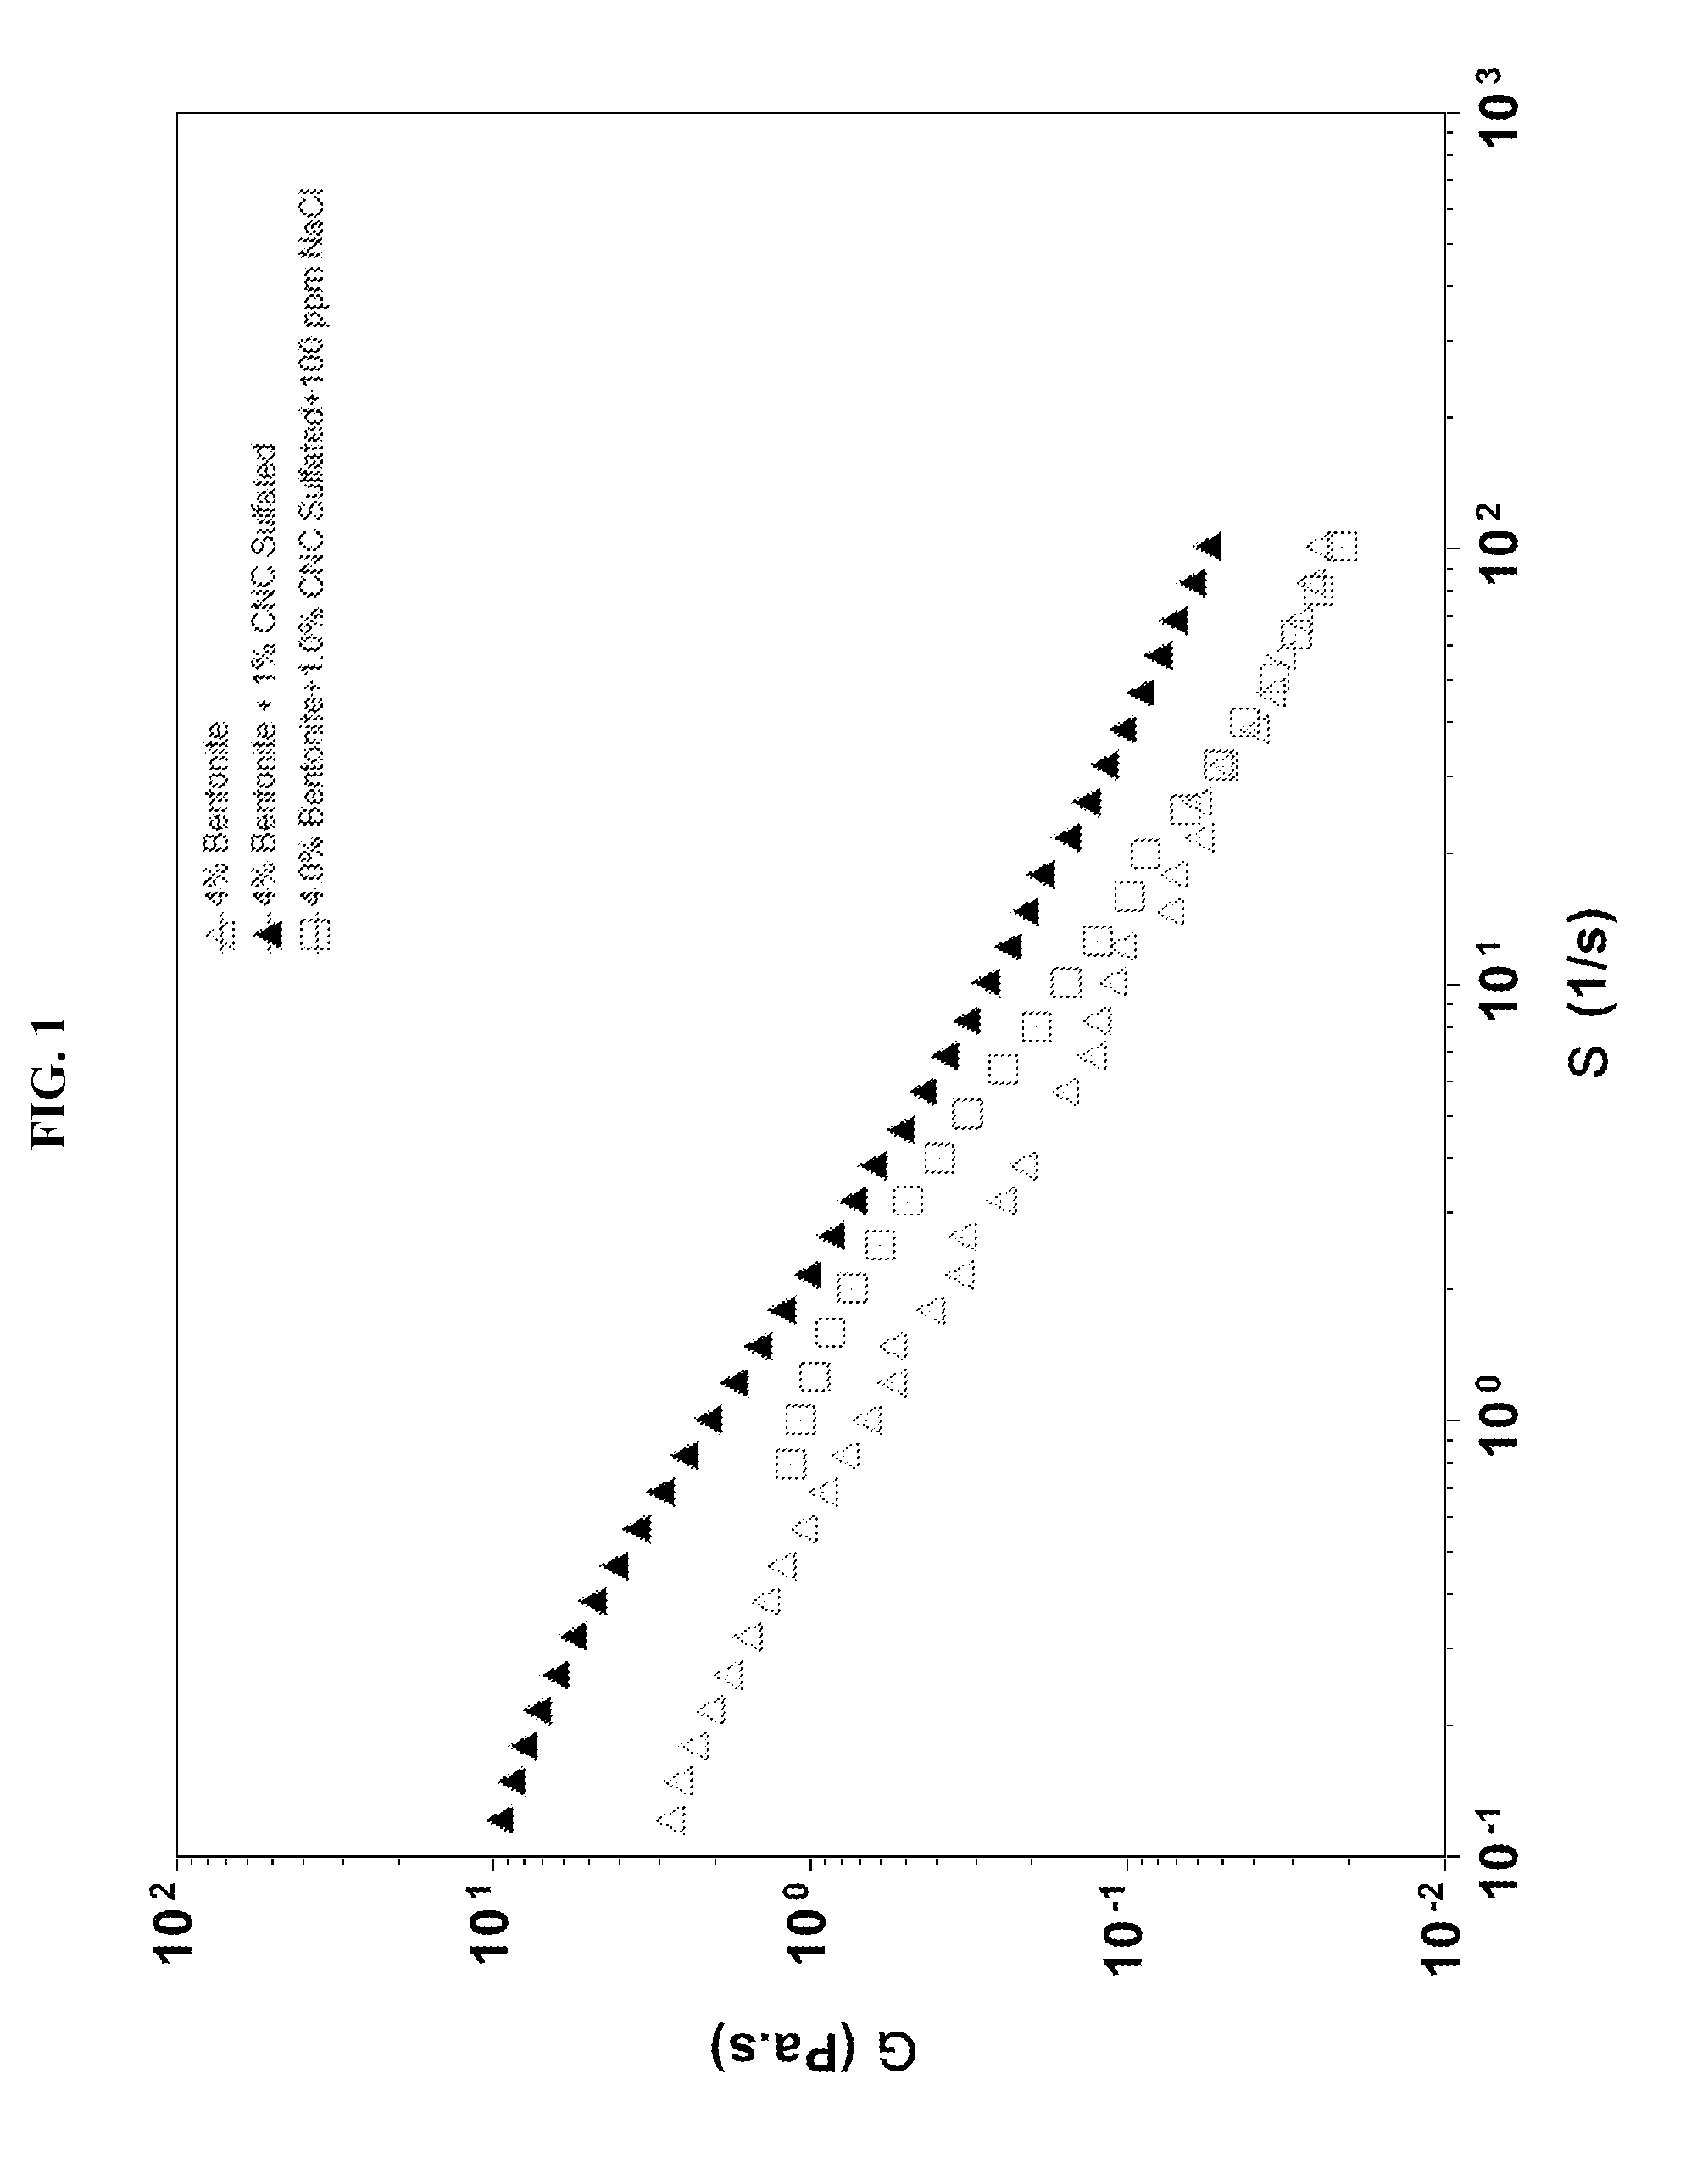 Drilling fluid additives and fracturing fluid additives containing cellulose nanofibers and/or nanocrystals